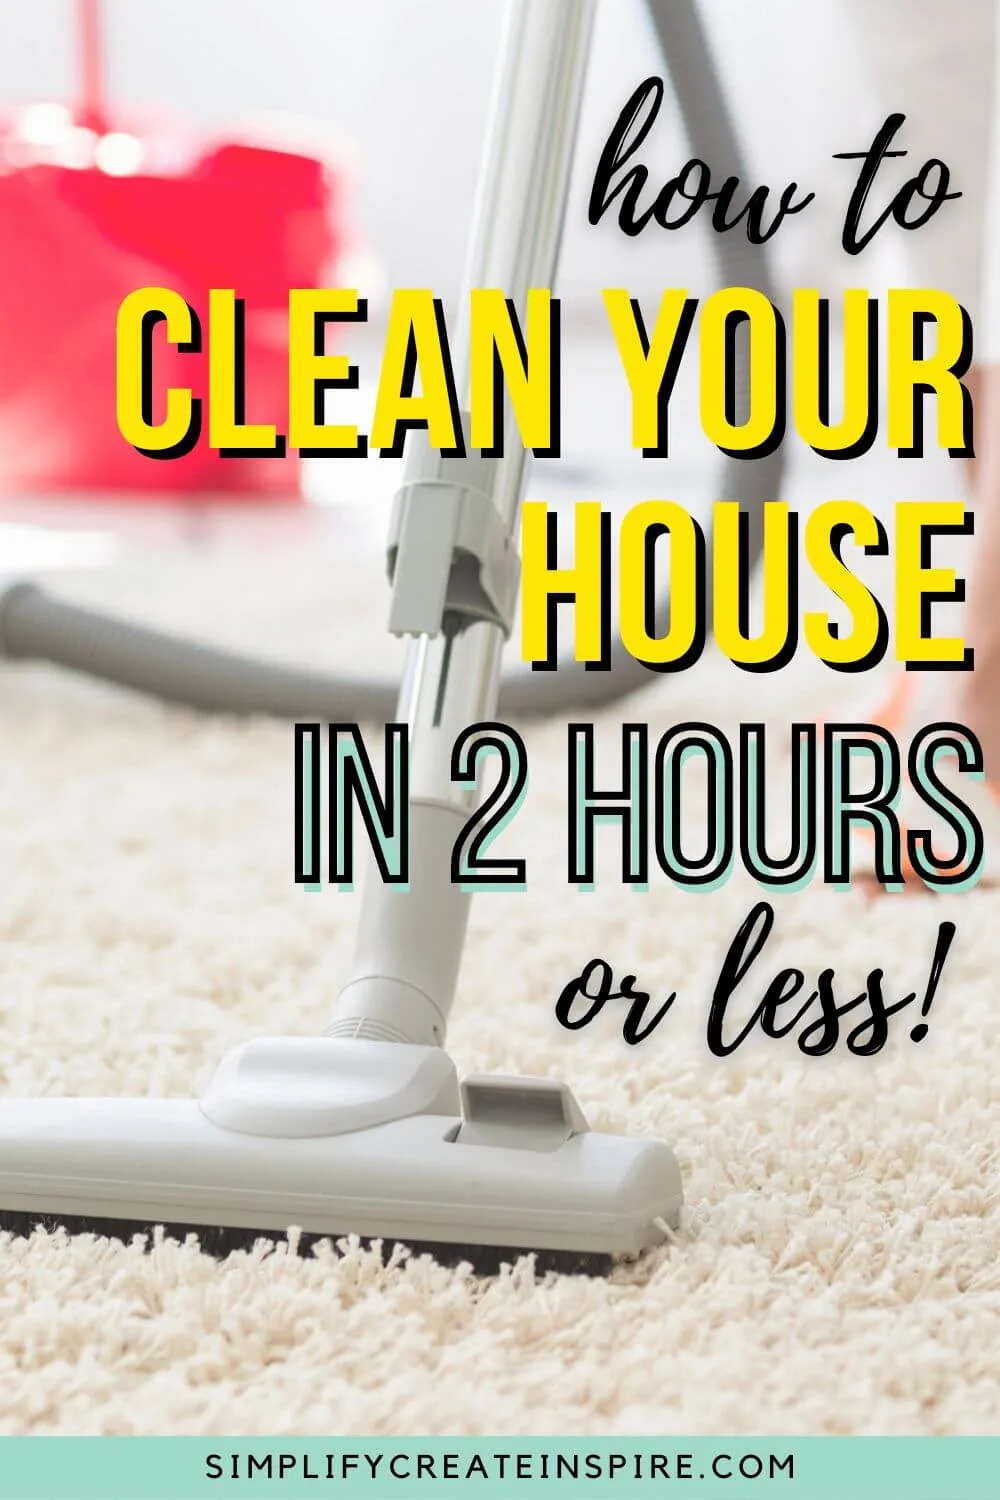 I'm a cleaning pro 7 super easy cleaning hacks to leave your home  spotless & smelling fresh - for £1 or less